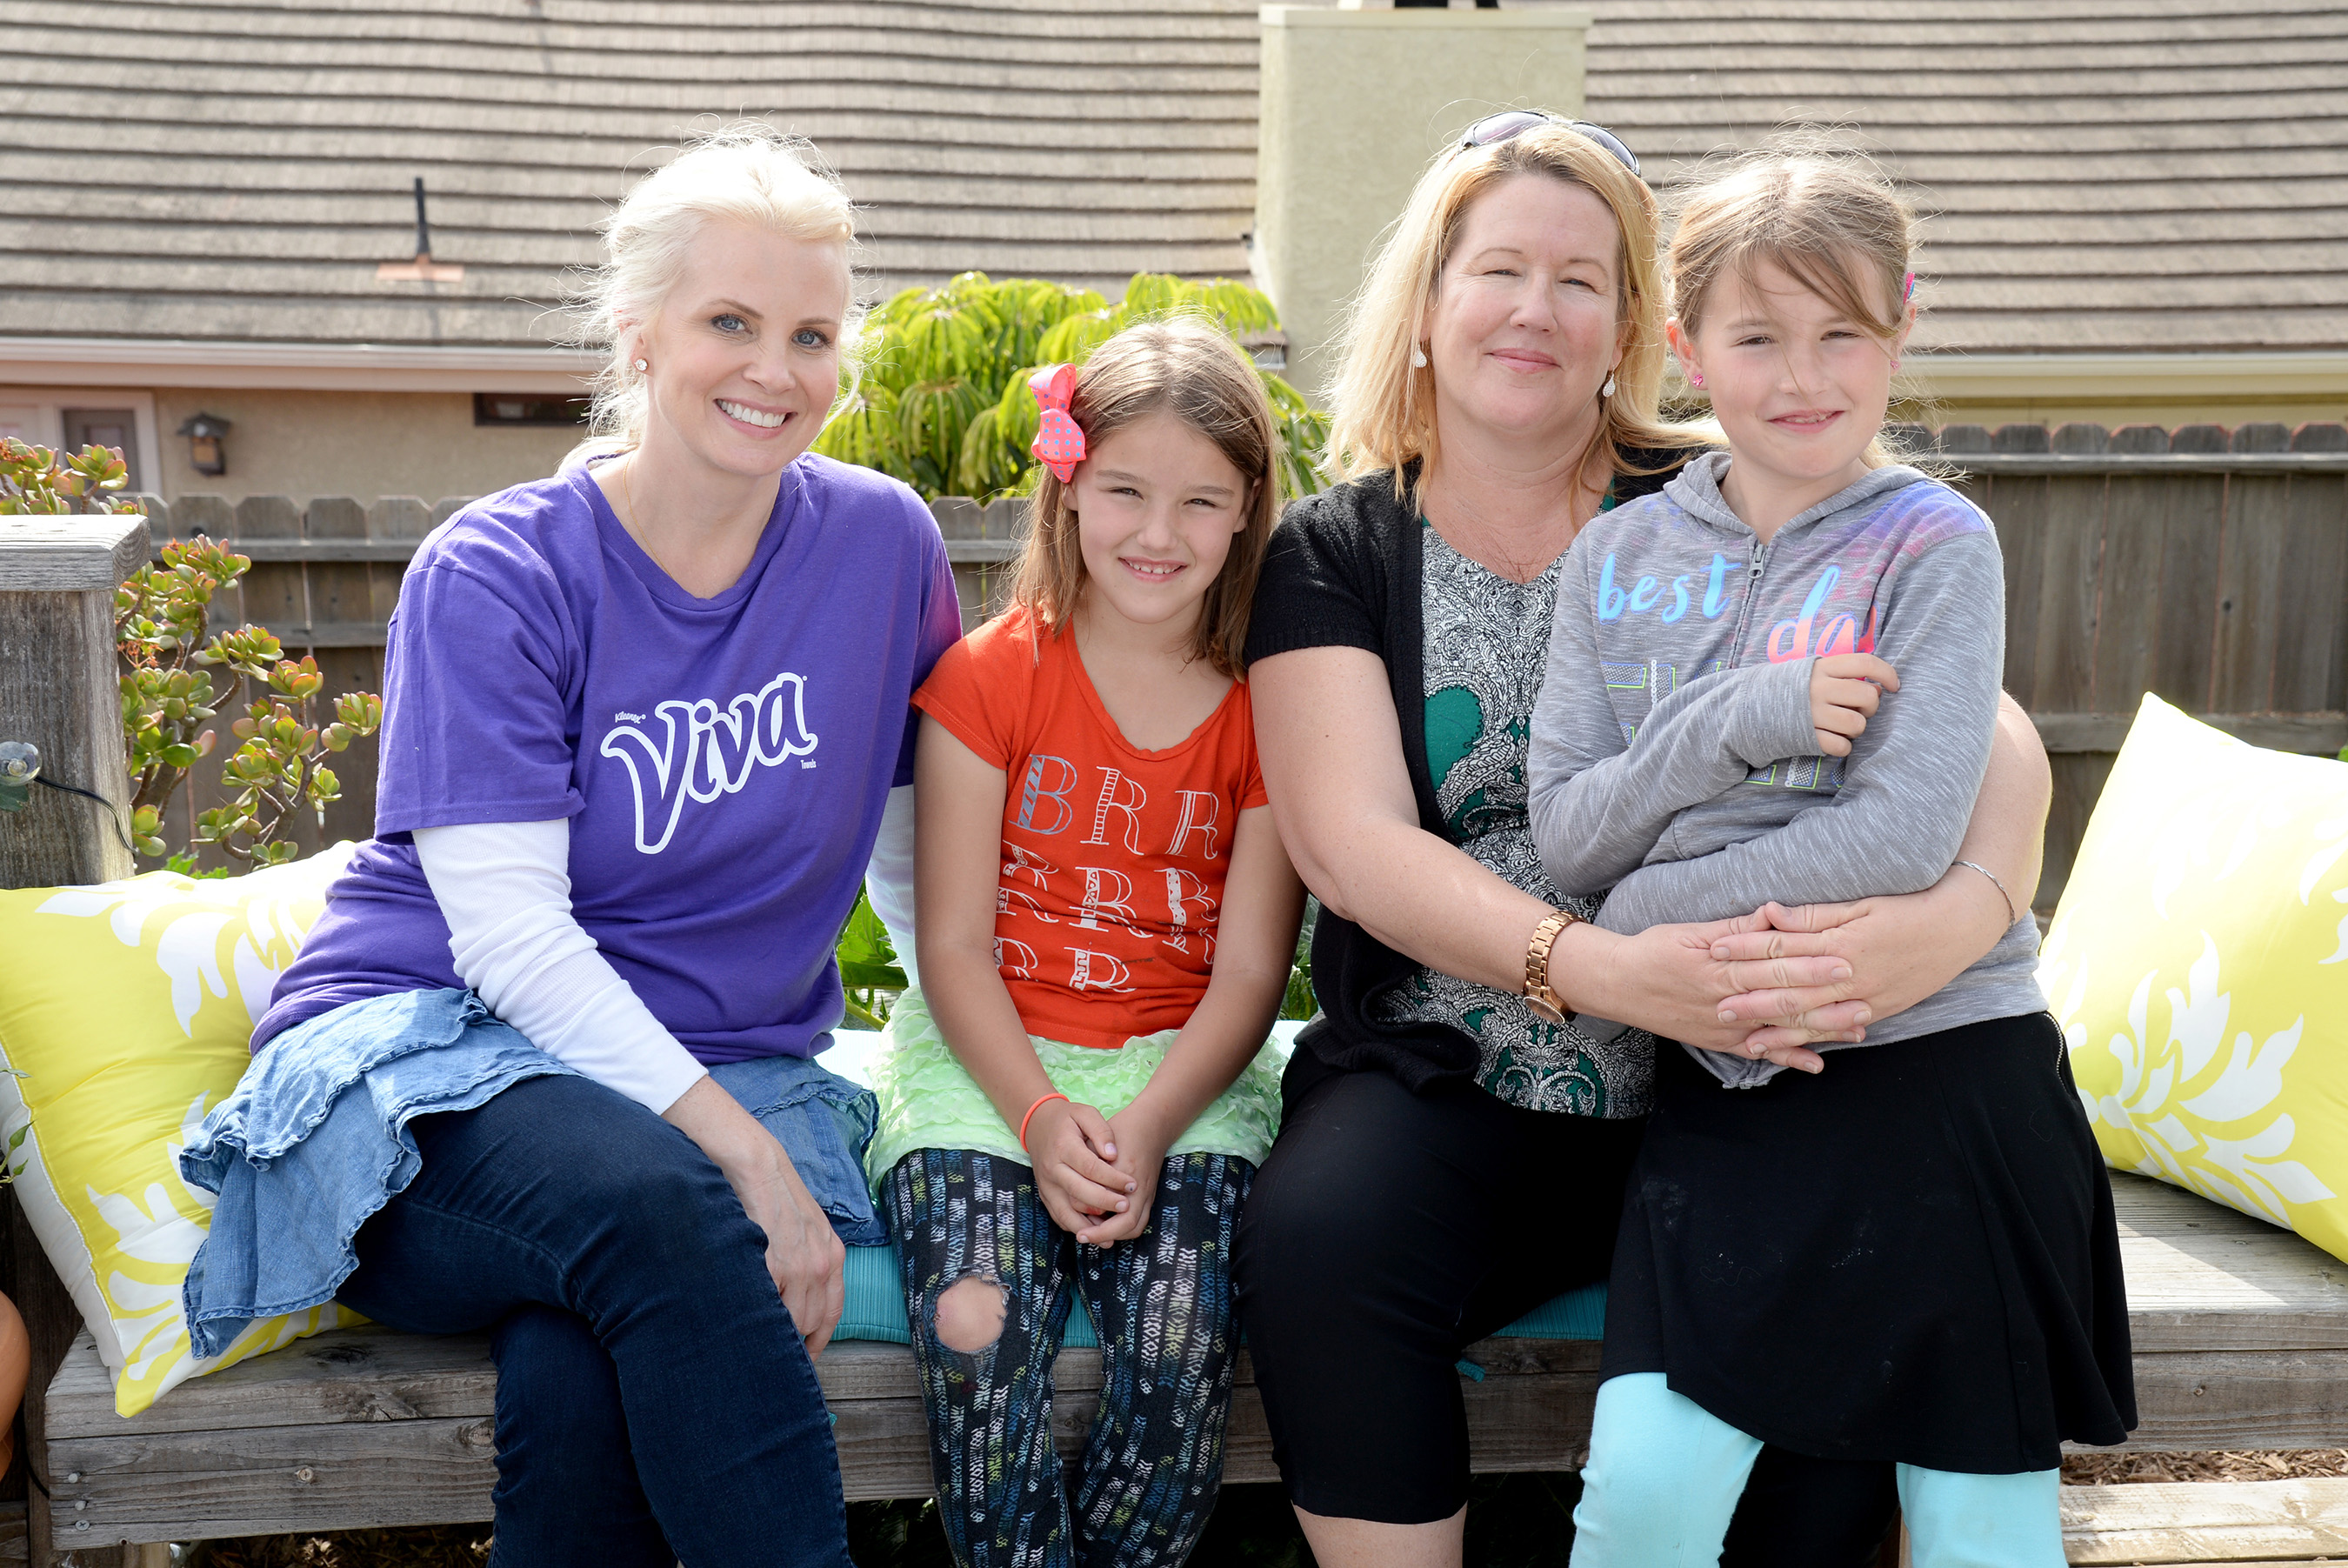 VENTURA, CALIFORNIA - APRIL 06: Actress and DIY expert Monica Potter poses with Cori Quick and her two daughters Daphne and Audrey who received a newly-rehabbed outdoor and patio space from Boys and Girls Club of Greater Ventura on April 6, 2016 in Ventura, California. (Photo by Michael Kovac/Getty Images for Viva (Kimberly-Clark))